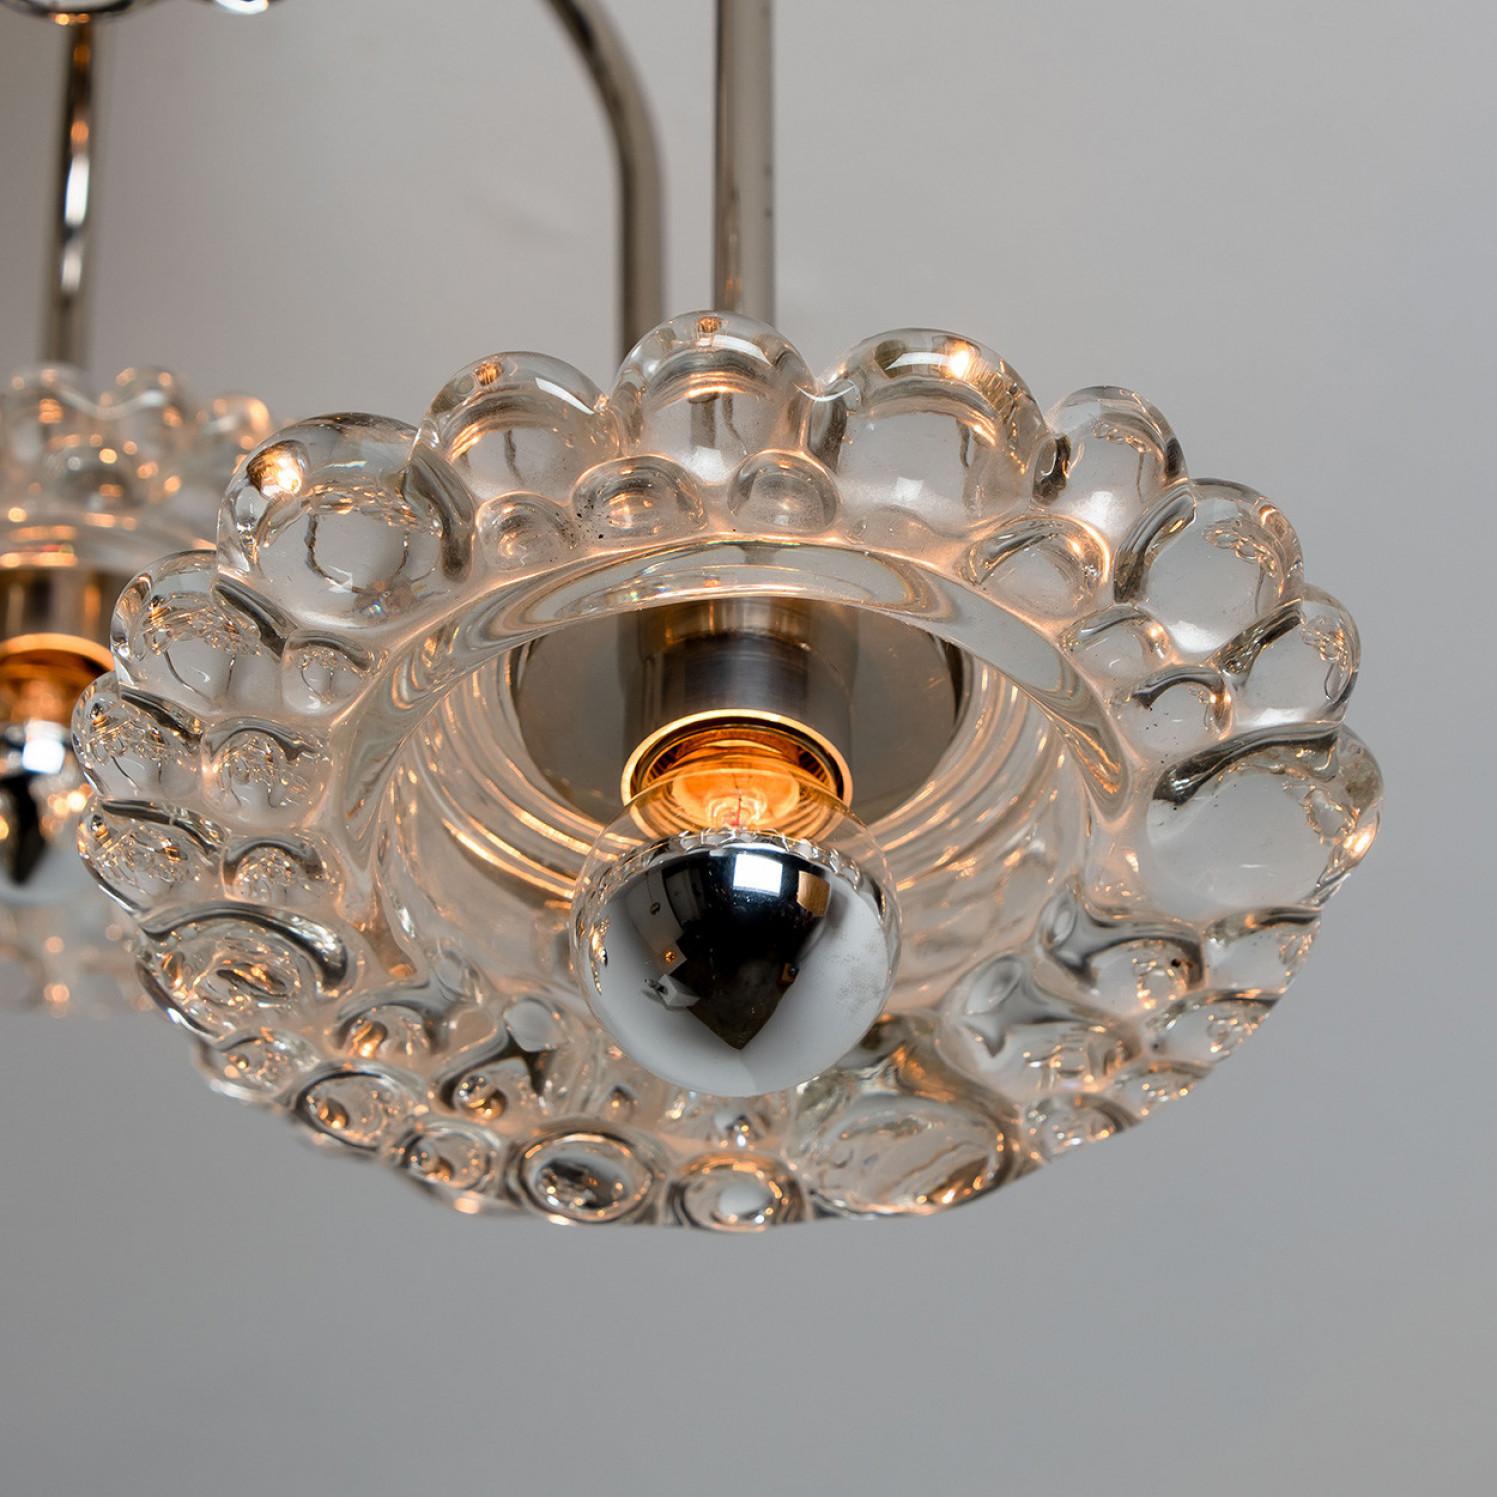 Glass and Chrome Chandelier by Hillebrand, 1960s For Sale 1